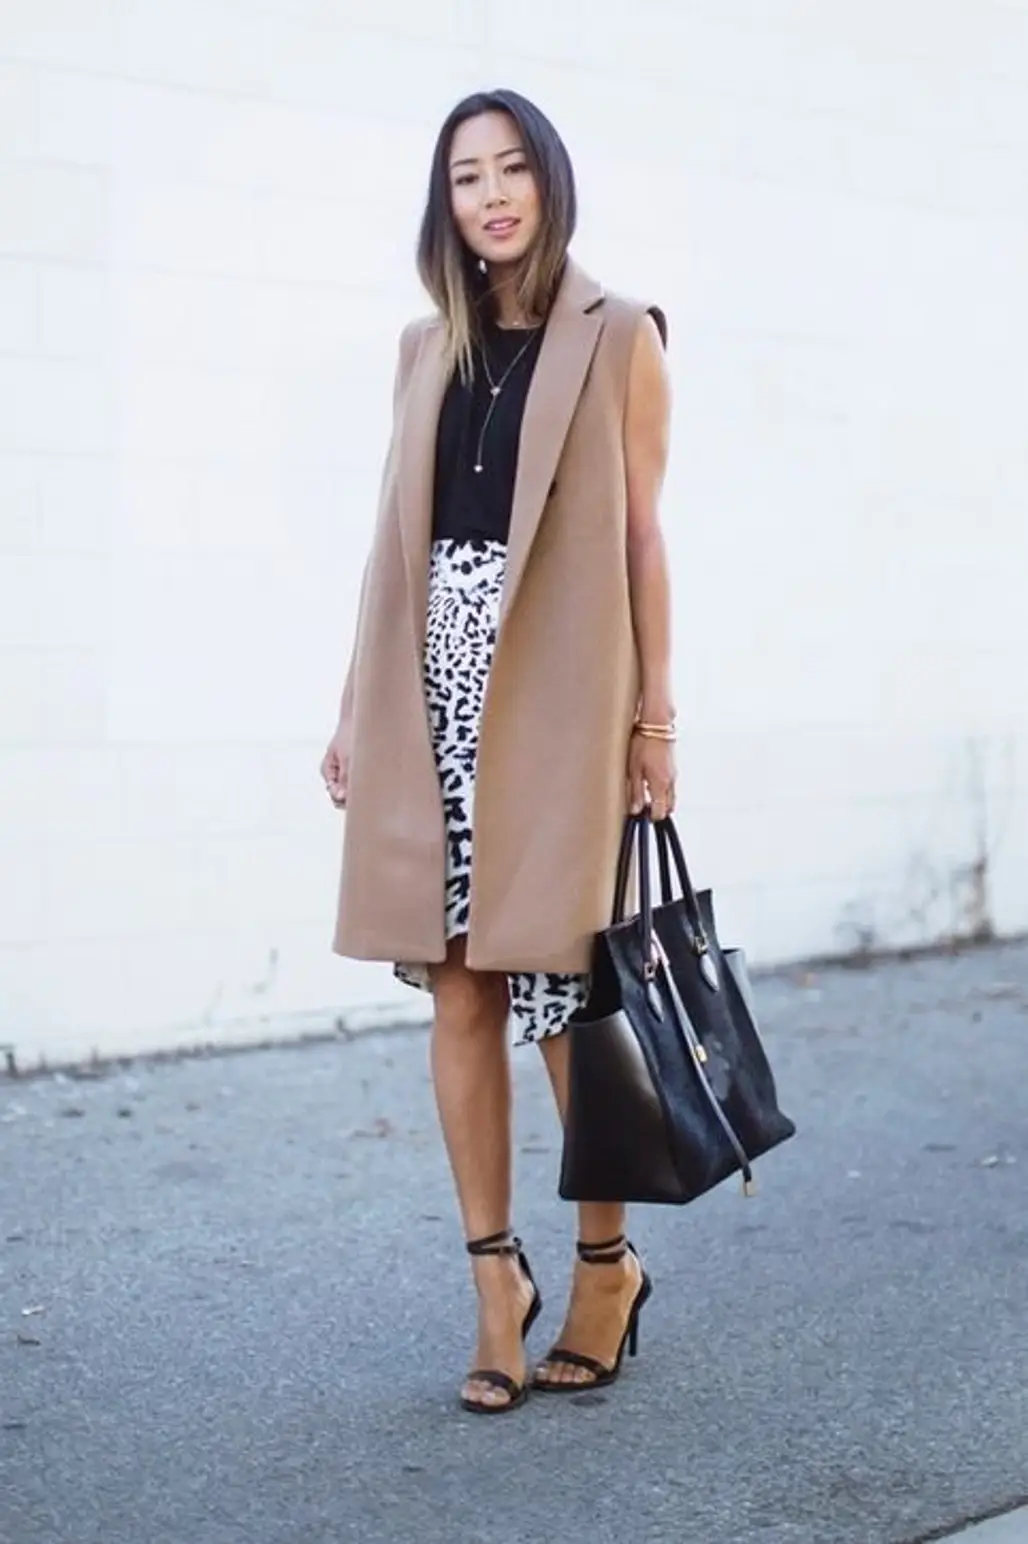 Bare Your Arms in Sleeveless Outerwear, like This Gorgeous Coat